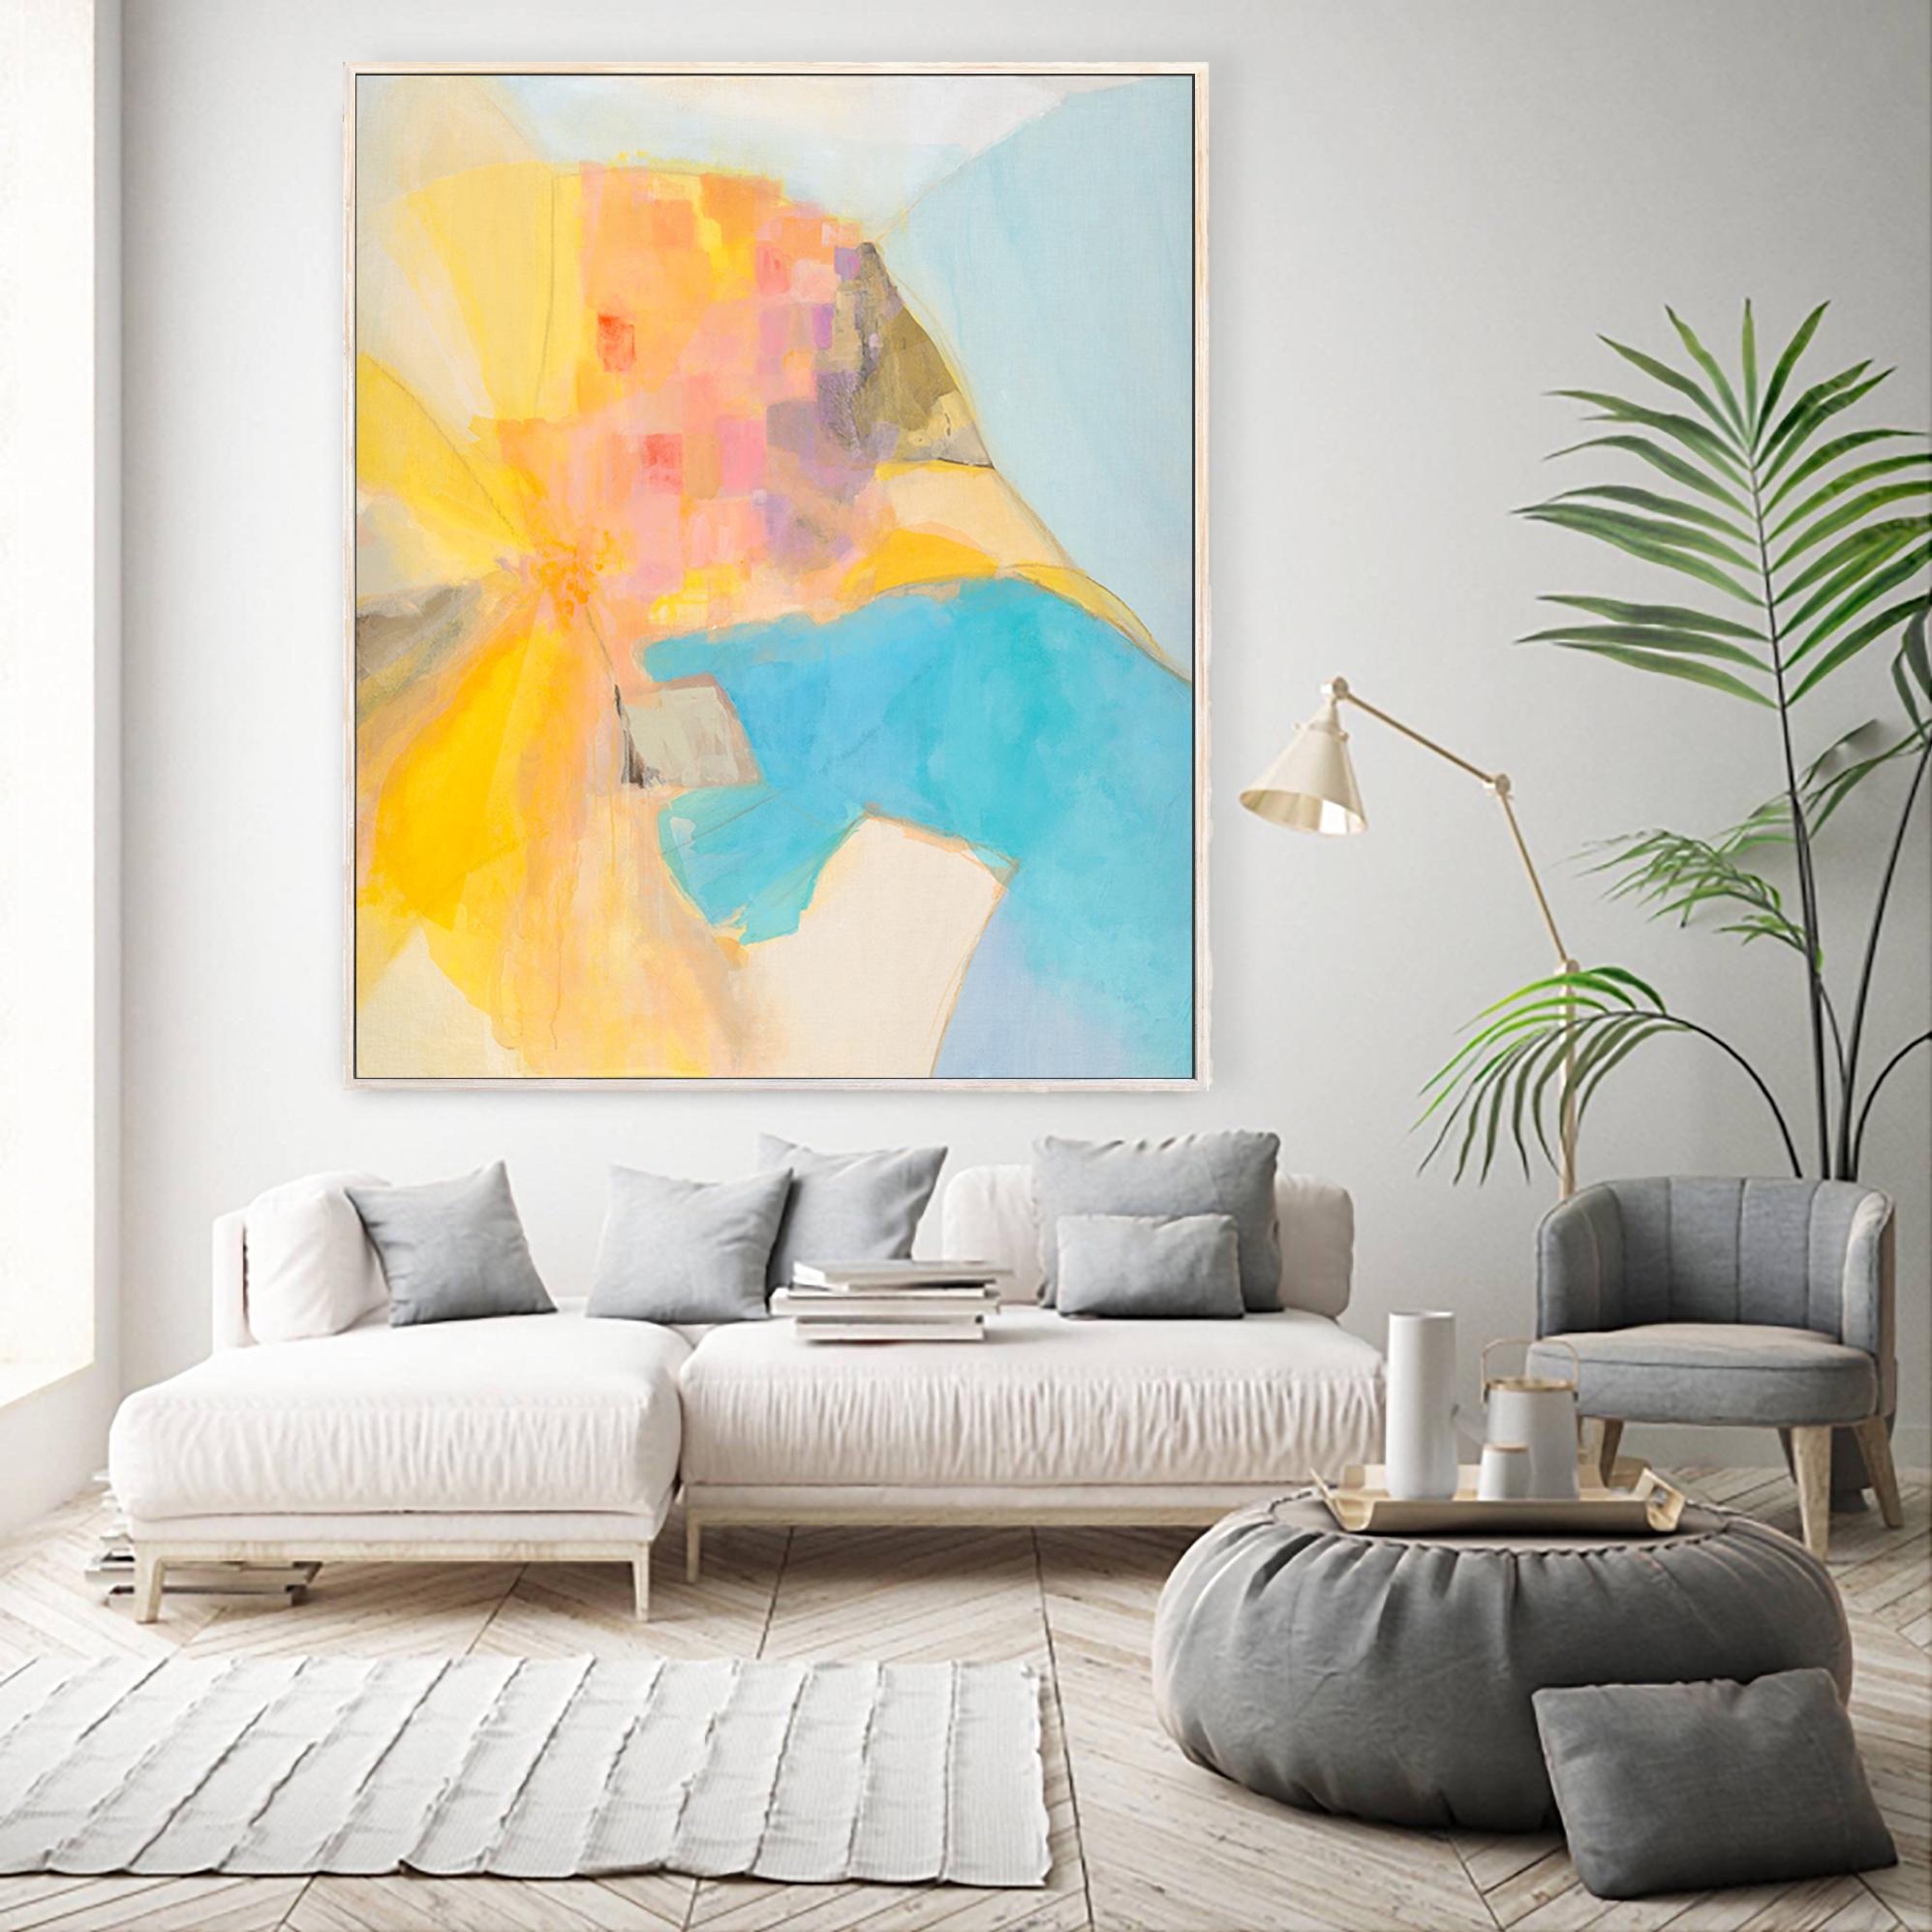 Manarola, Original Framed Contemporary Colorful Abstract Mixed Media Painting - Beige Abstract Painting by Stacey Warnix